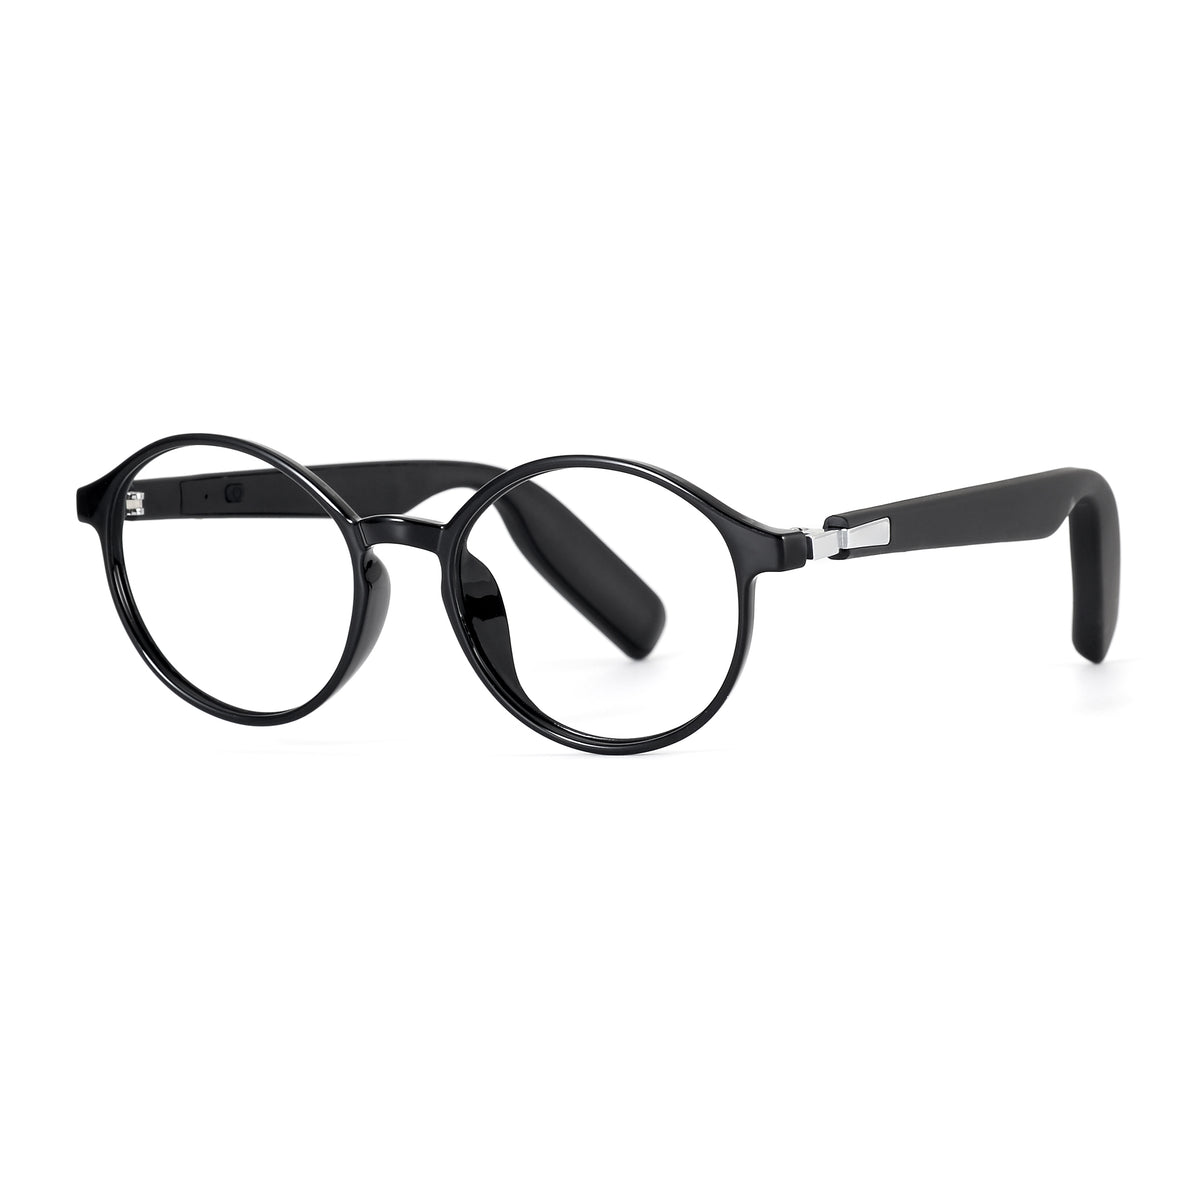 Ellipse - Bluetooth Audio Glasses With Interchangeable Front Frame